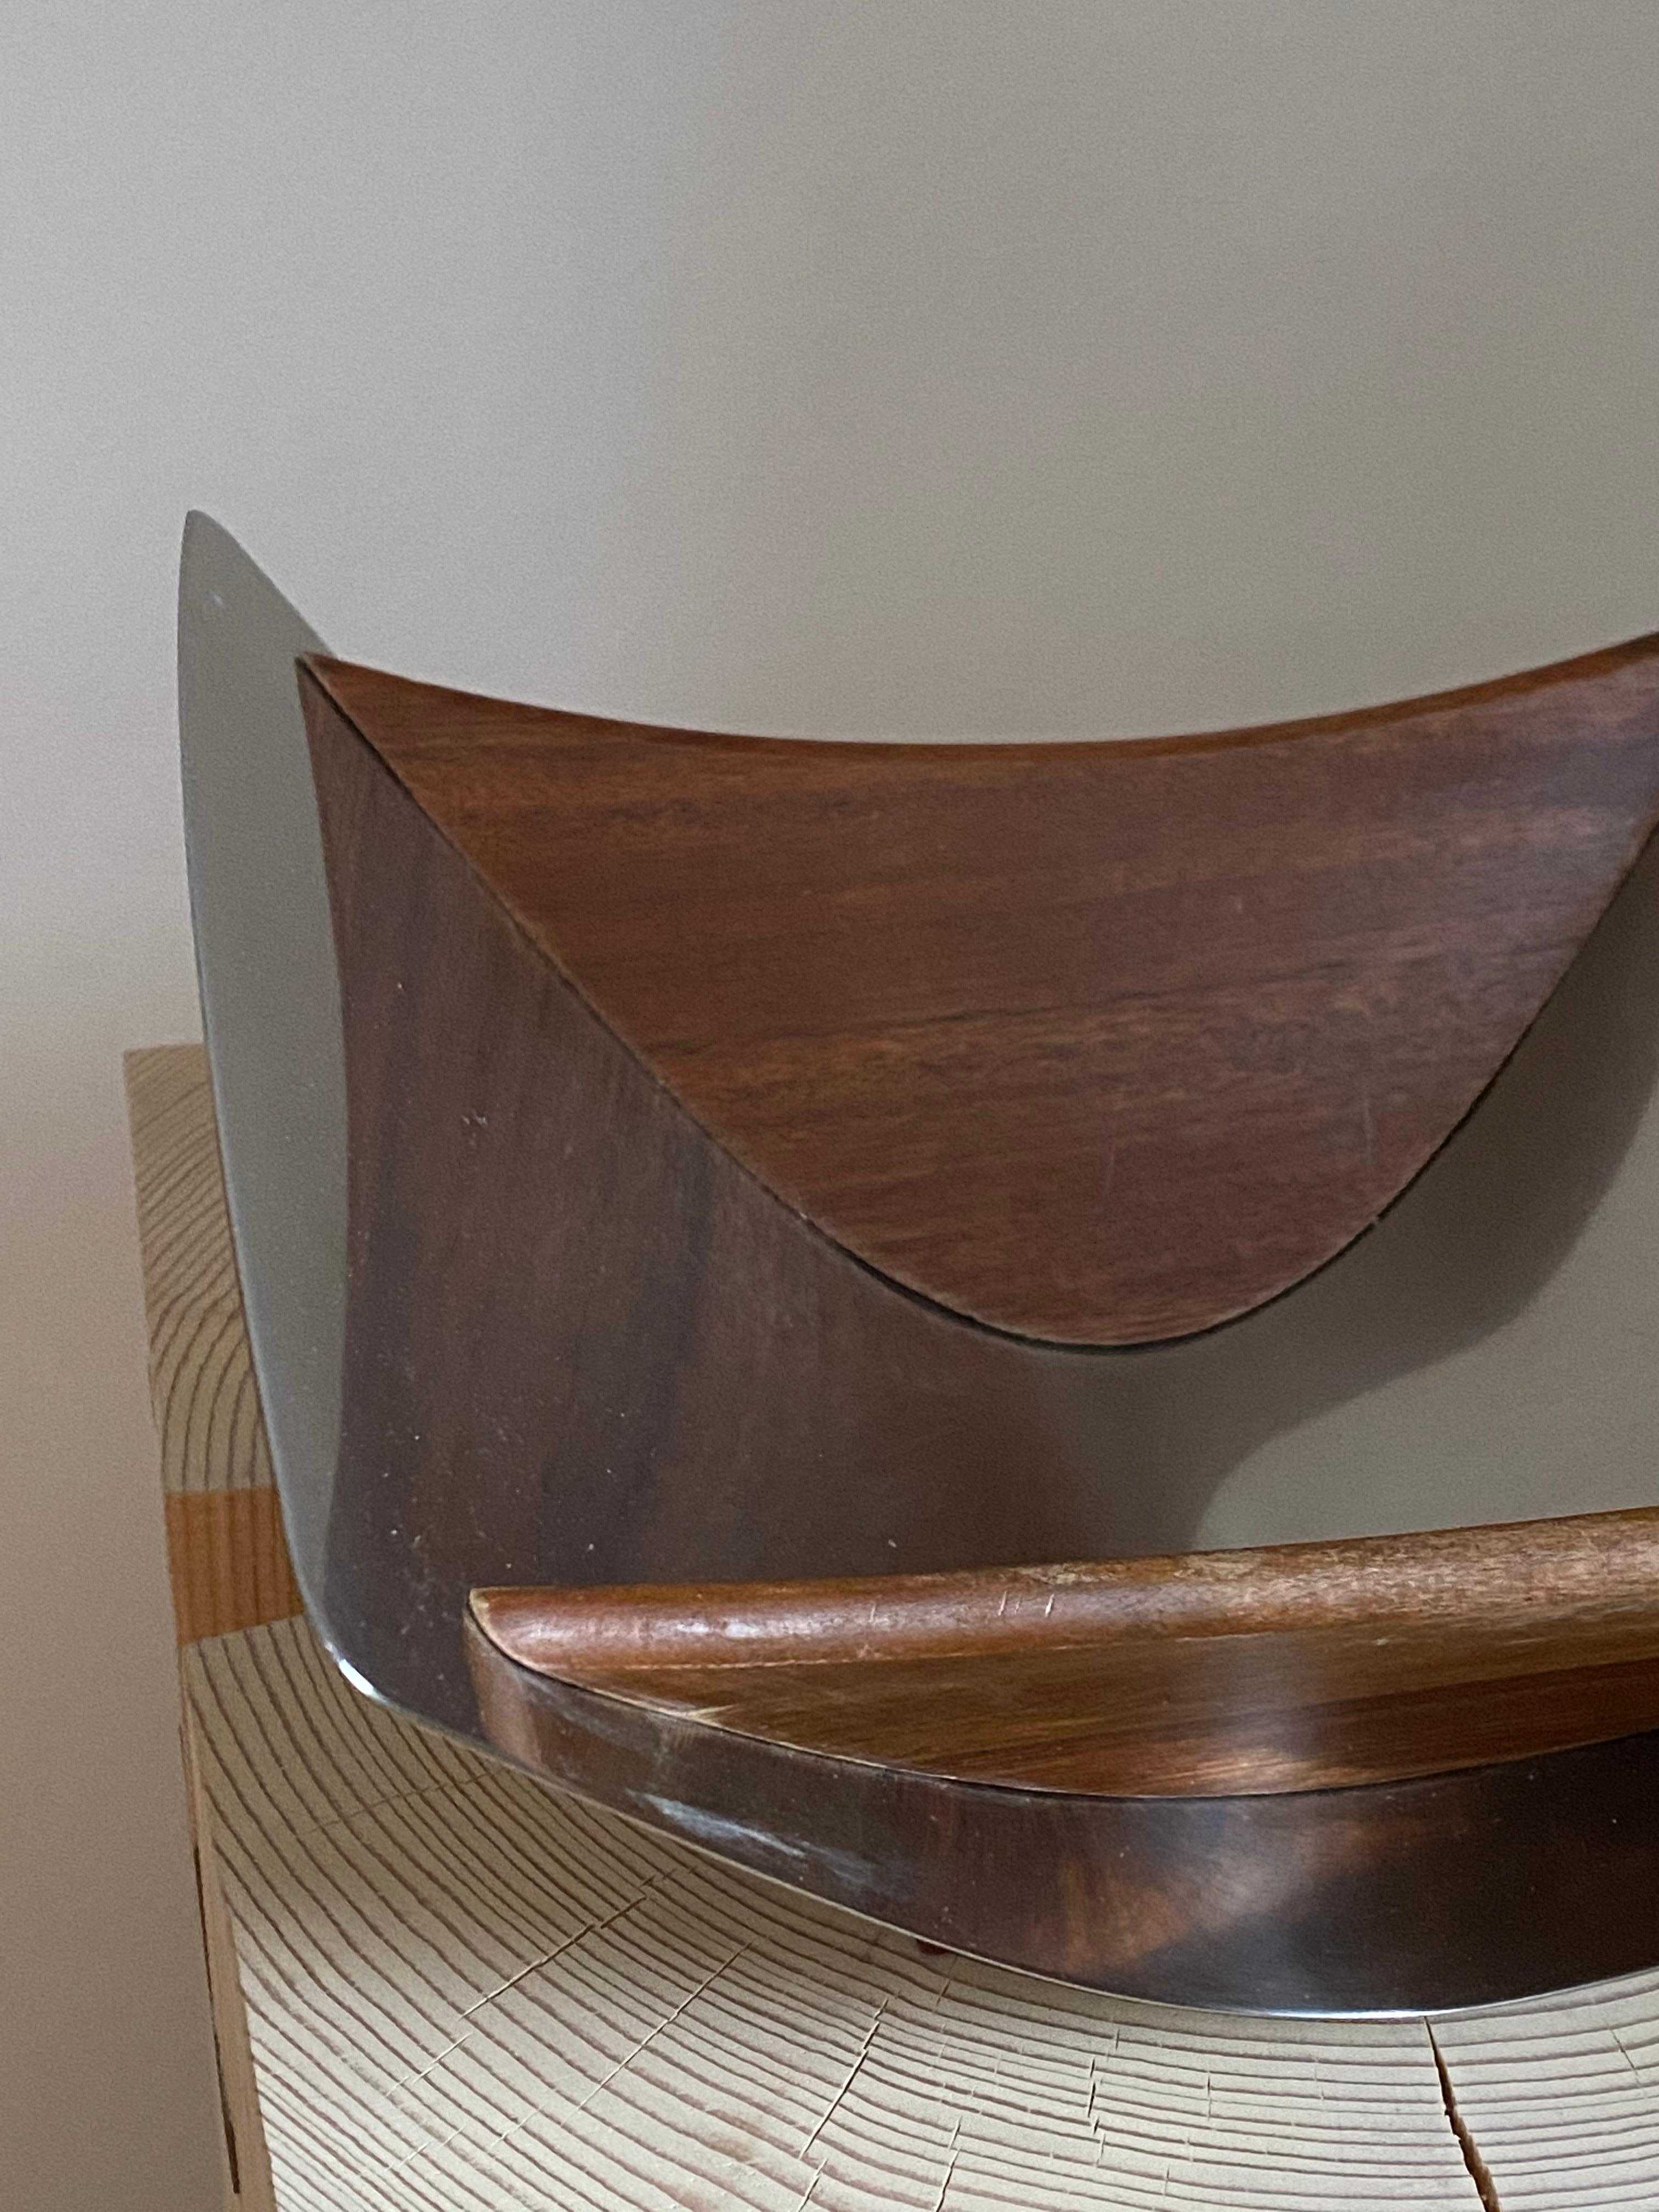 Swedish Design Modernist Vide Poche Bowl, Stainless Steel, Teak, Patented, 1950s In Good Condition In High Point, NC